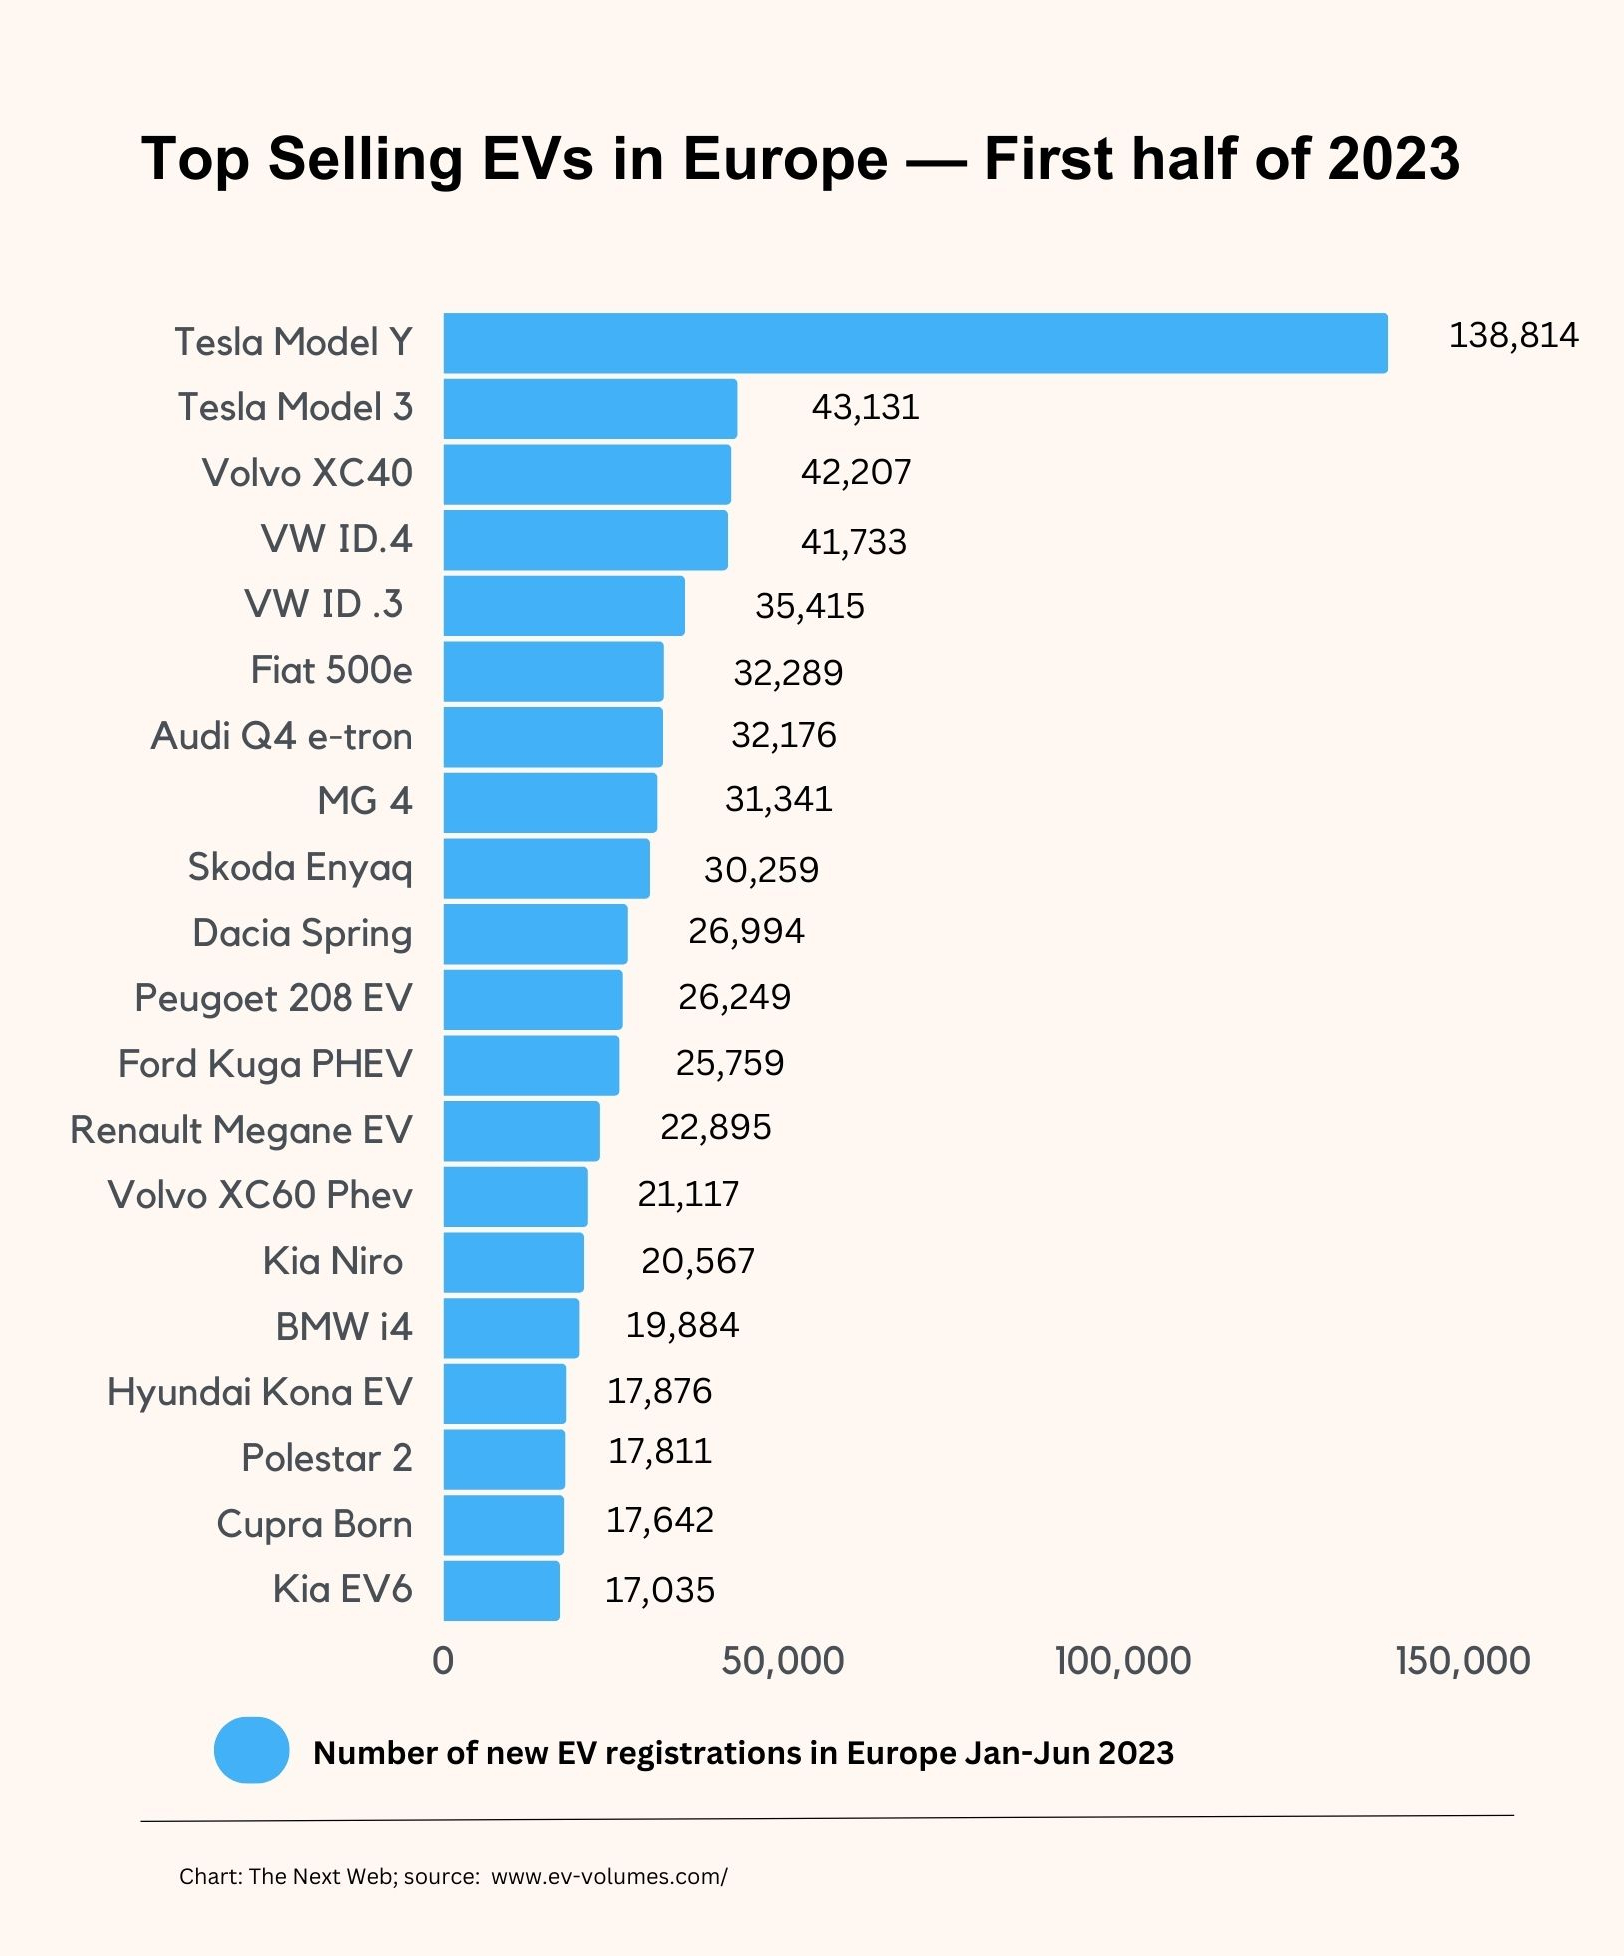 A graph showing the top 20 best-selling EV models in the first half of 2023